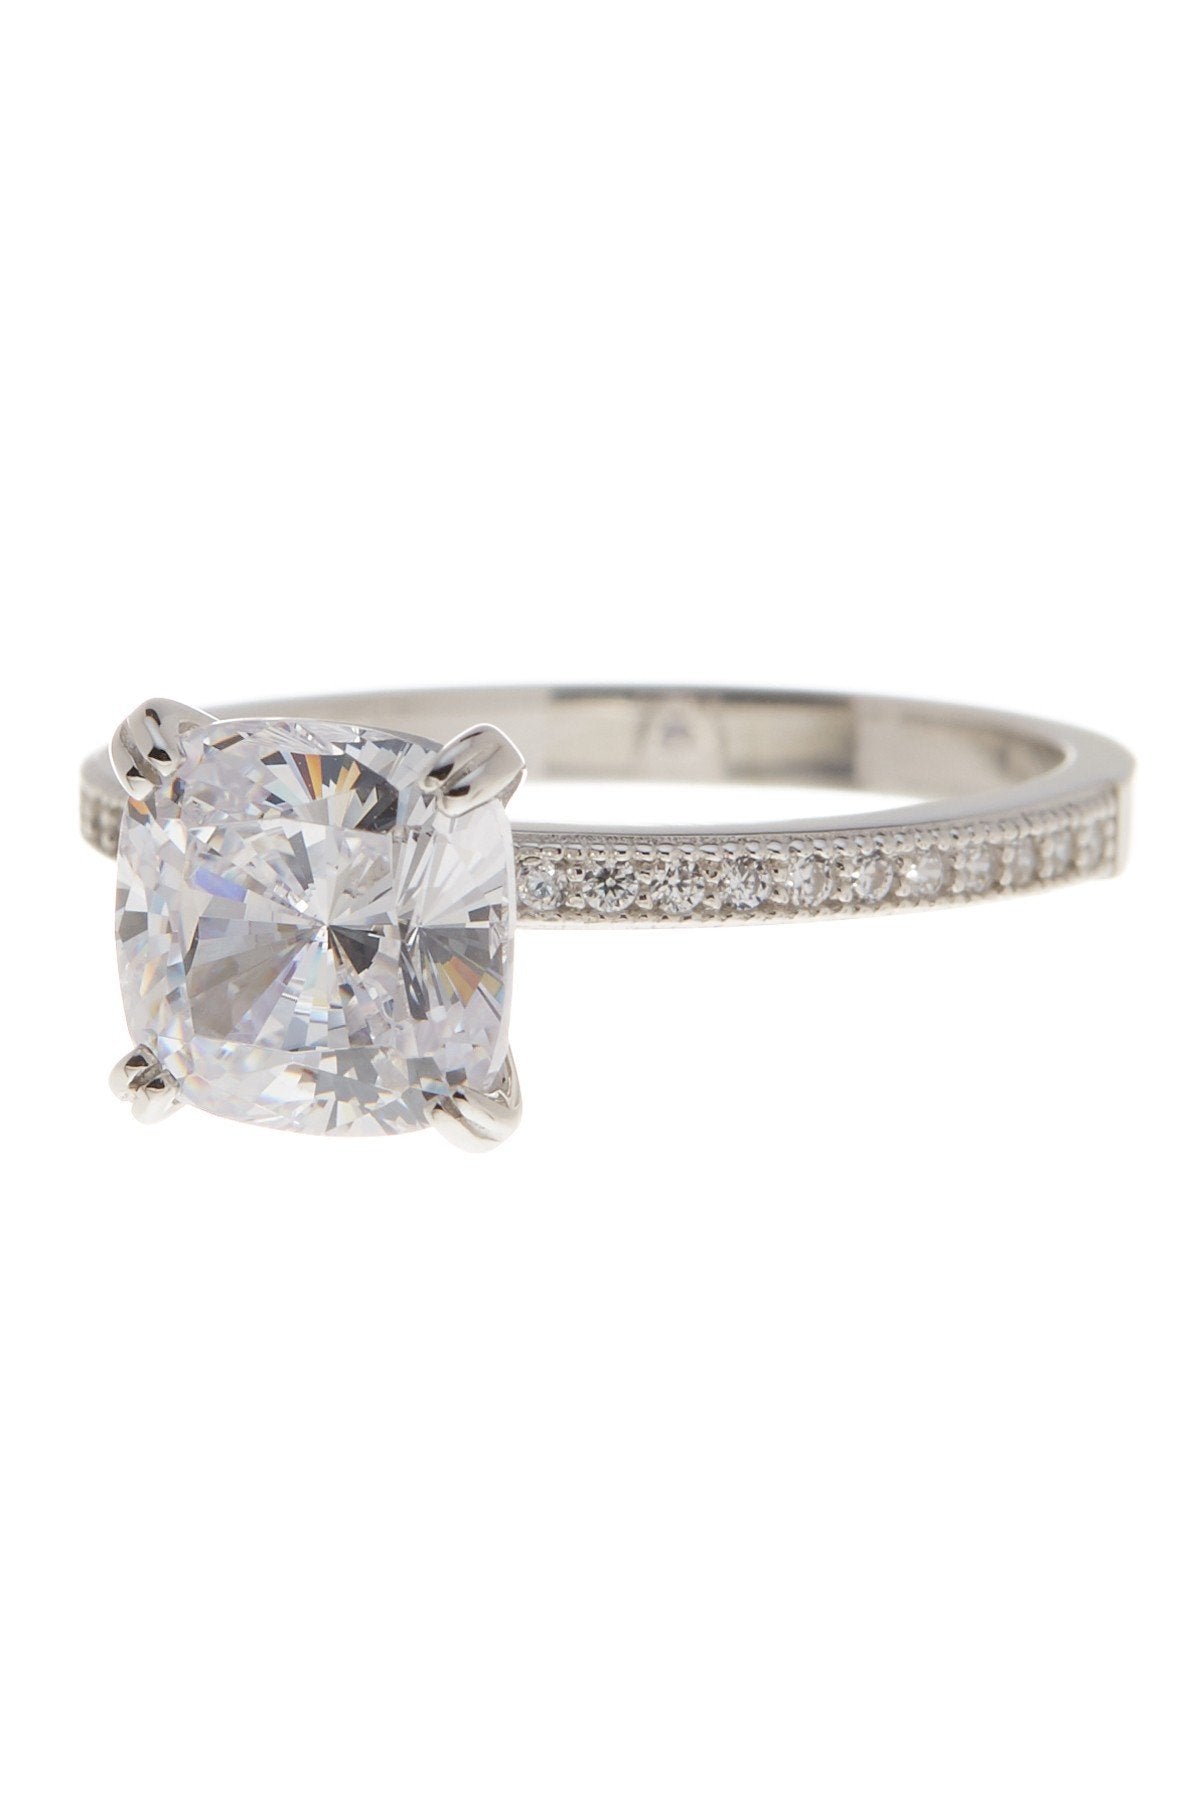 Sterling Silver Cushion CZ Solitaire Ring - Sterling Forever